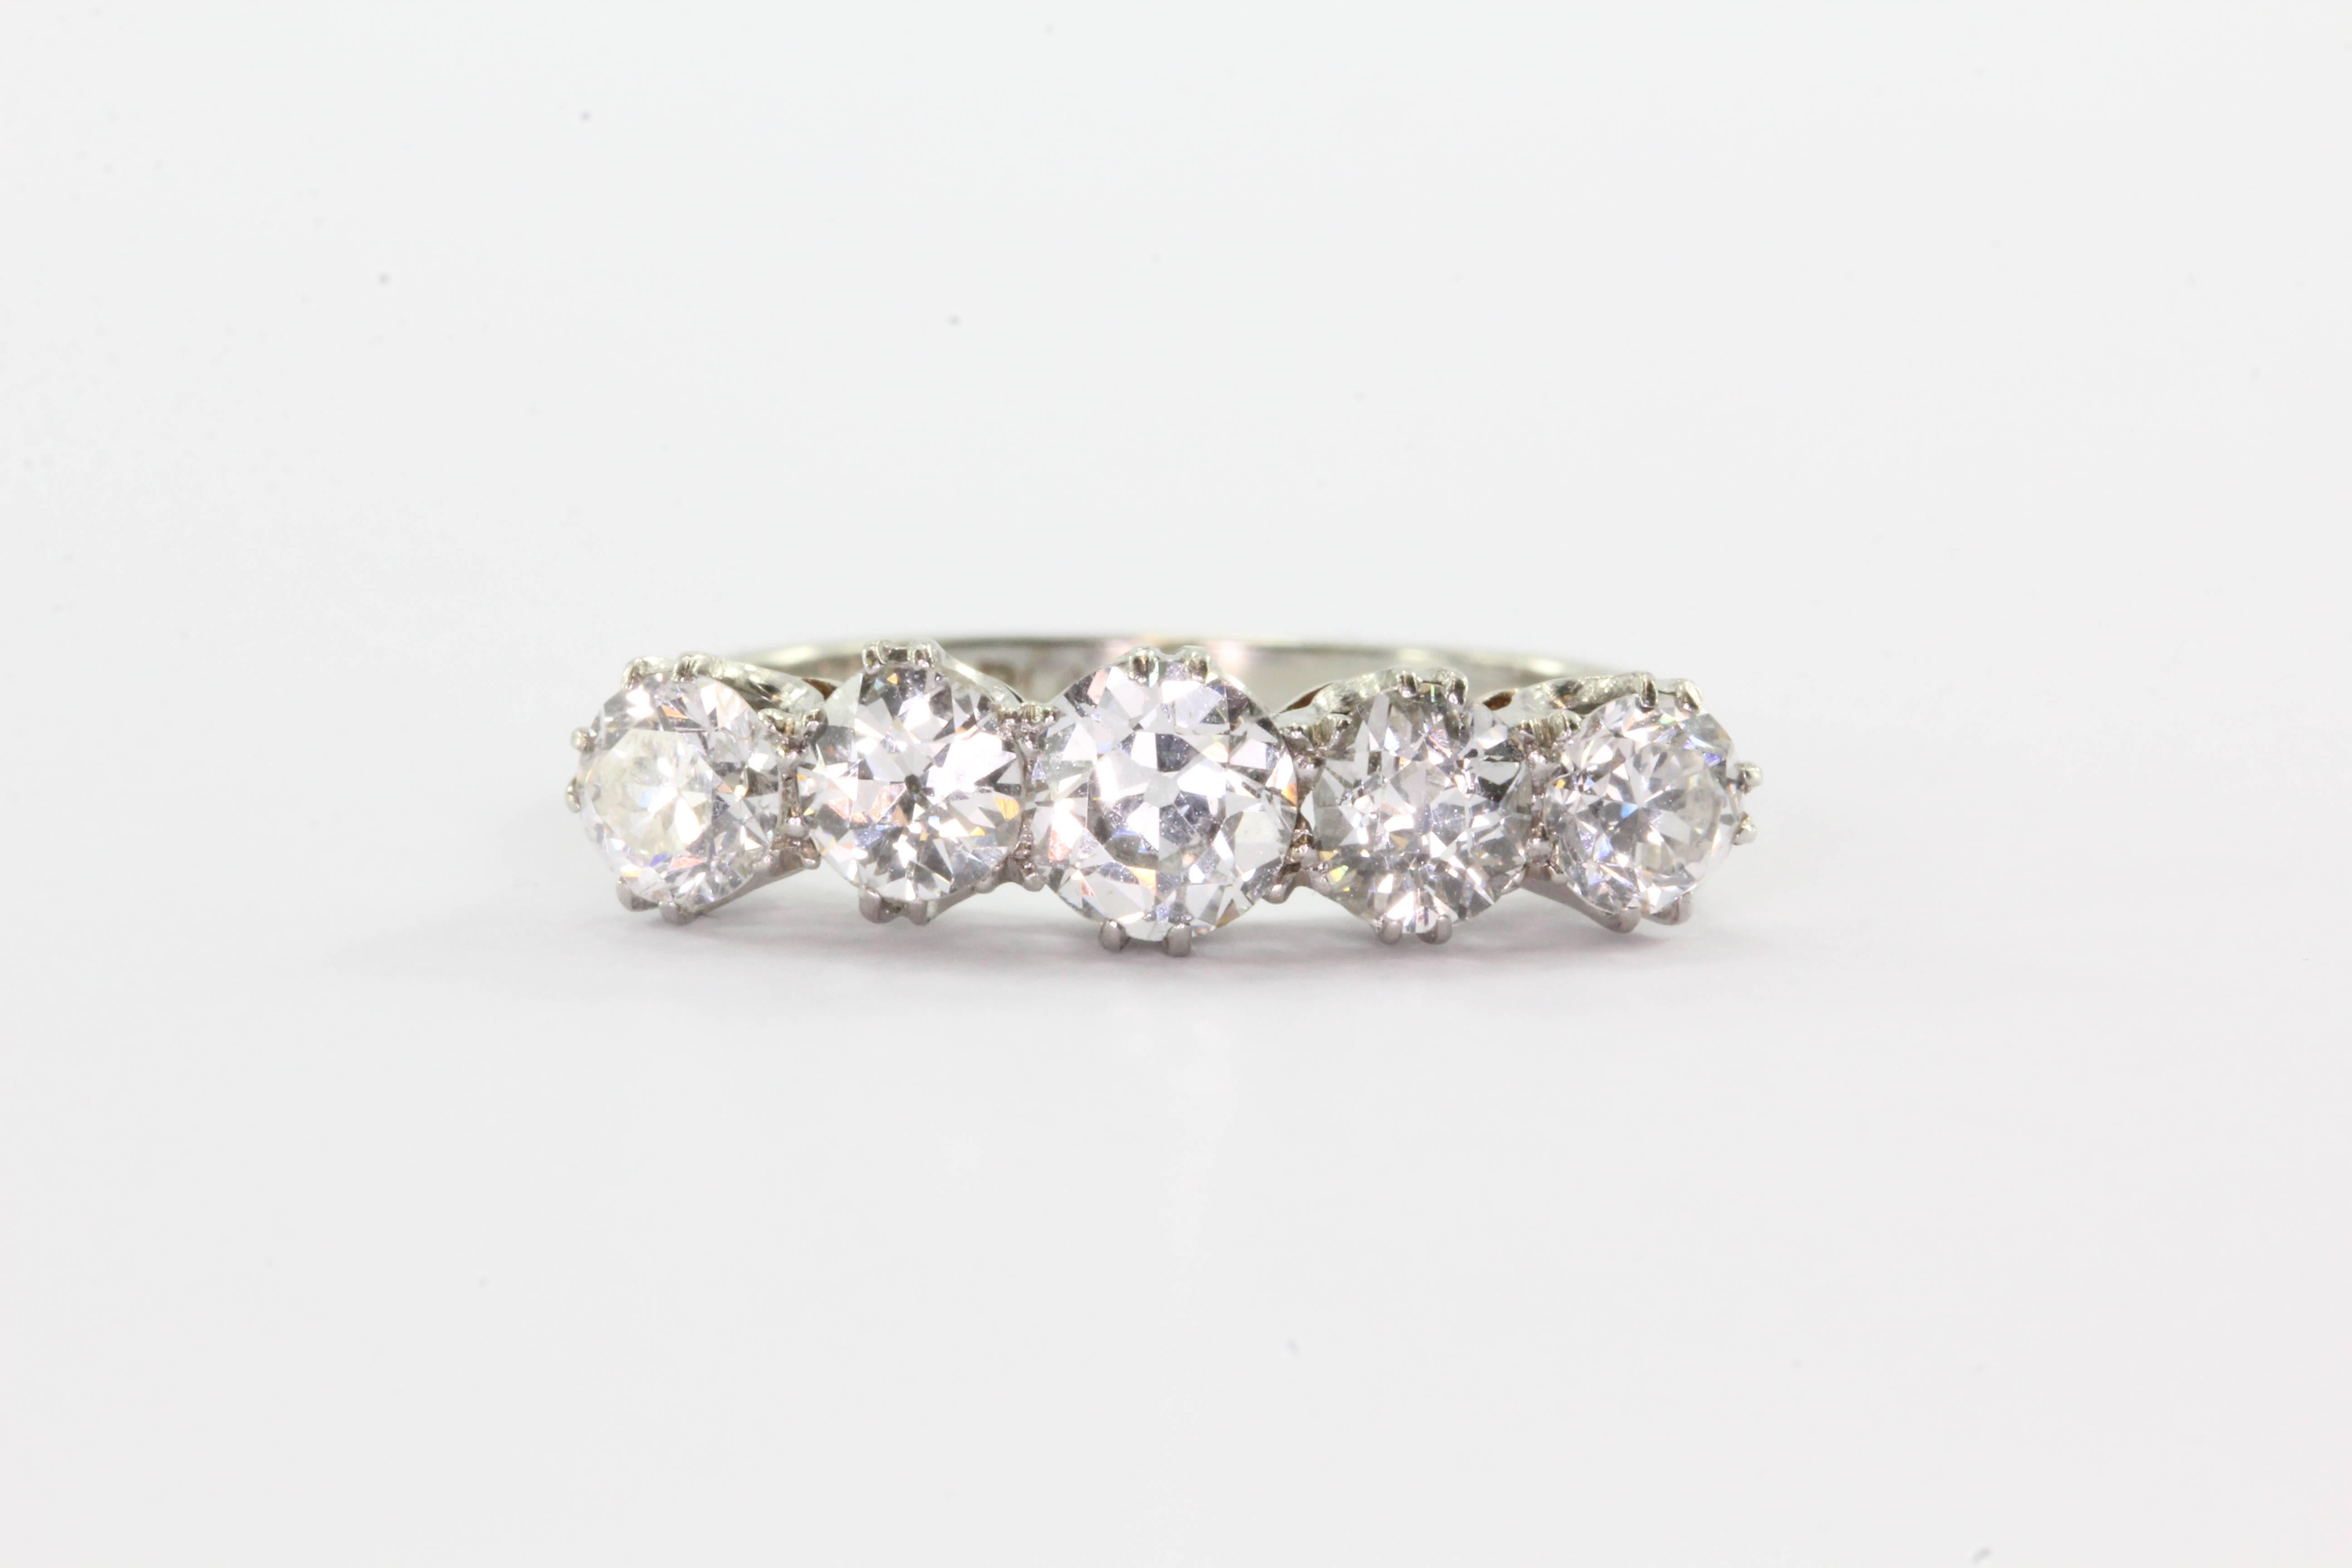 18k White Gold Platinum 1.75 Carat 5 Old European Cut Diamond Ring Band. The ring is in excellent estate condition and ready to wear. It is hallmarked 18CT Plat. It is set with 5 old European Cut diamonds that come to approximately 1.75 carats